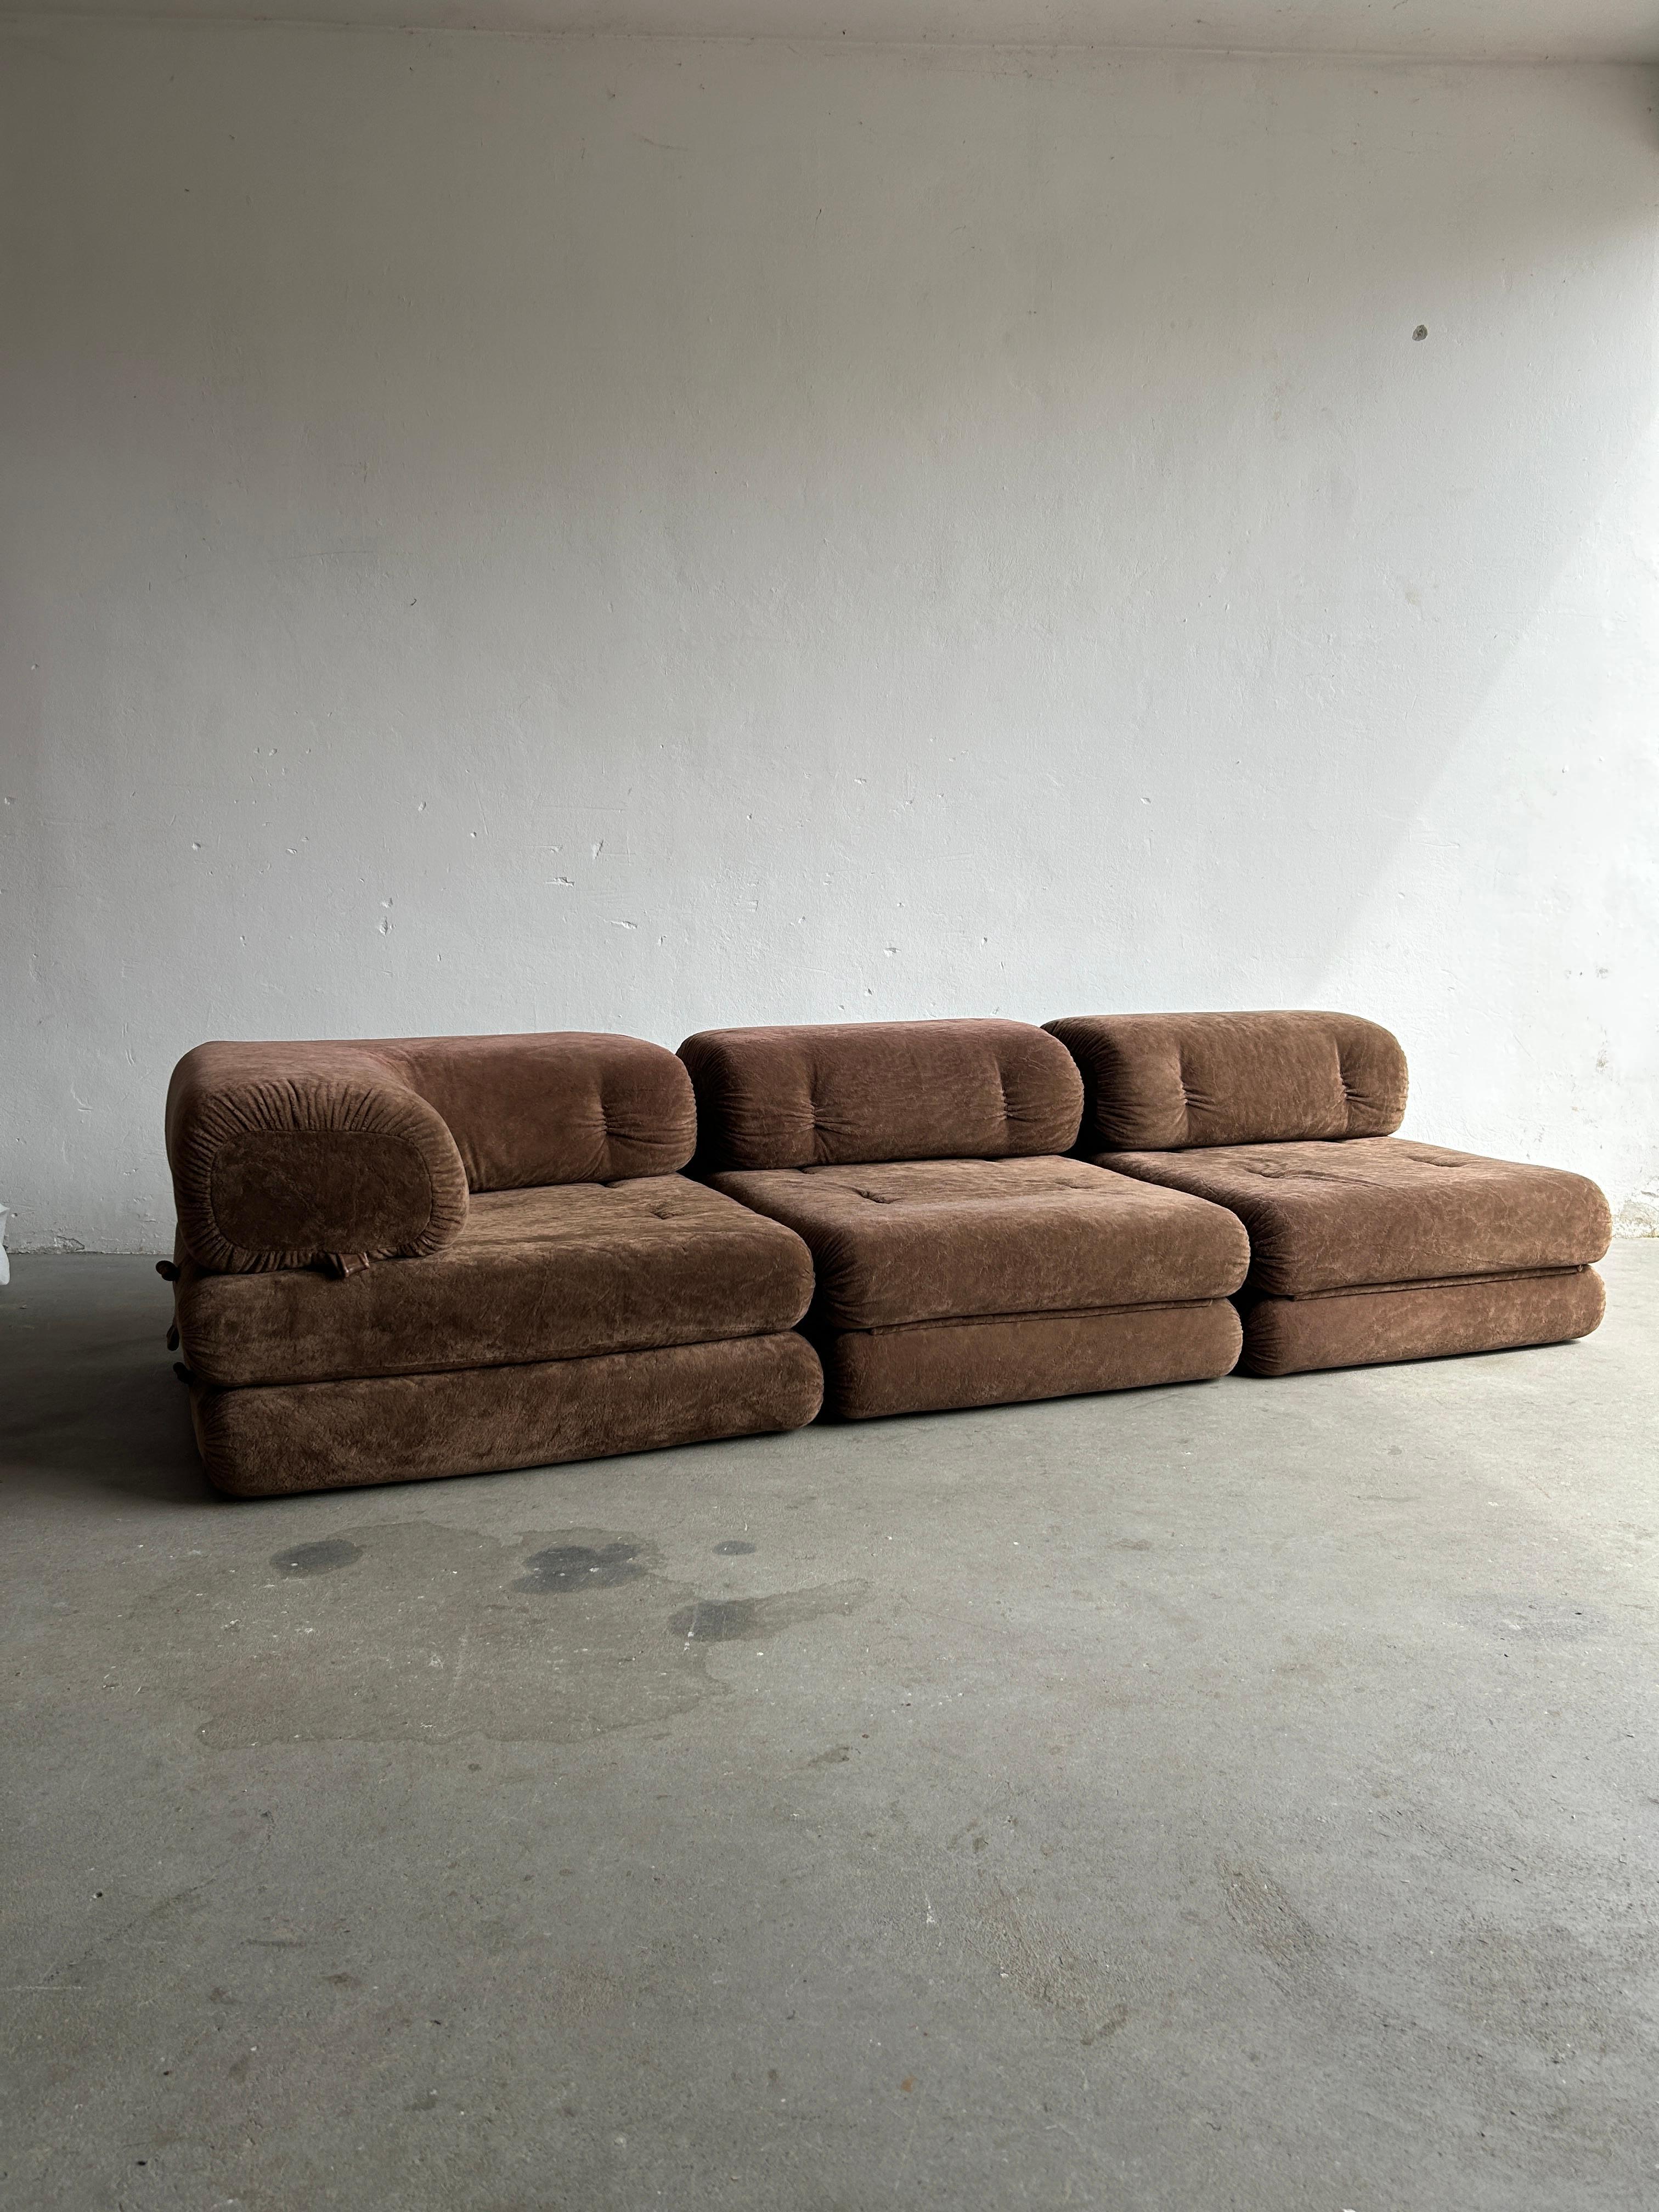 An original vintage midcentury-Modern sectional sofa and daybed designed and produced by Wittmann, Austria in the 1970s. Rare 'Triade' model, referencing the three modules that are included in the set. Beautiful soft and quality made brown fabric.